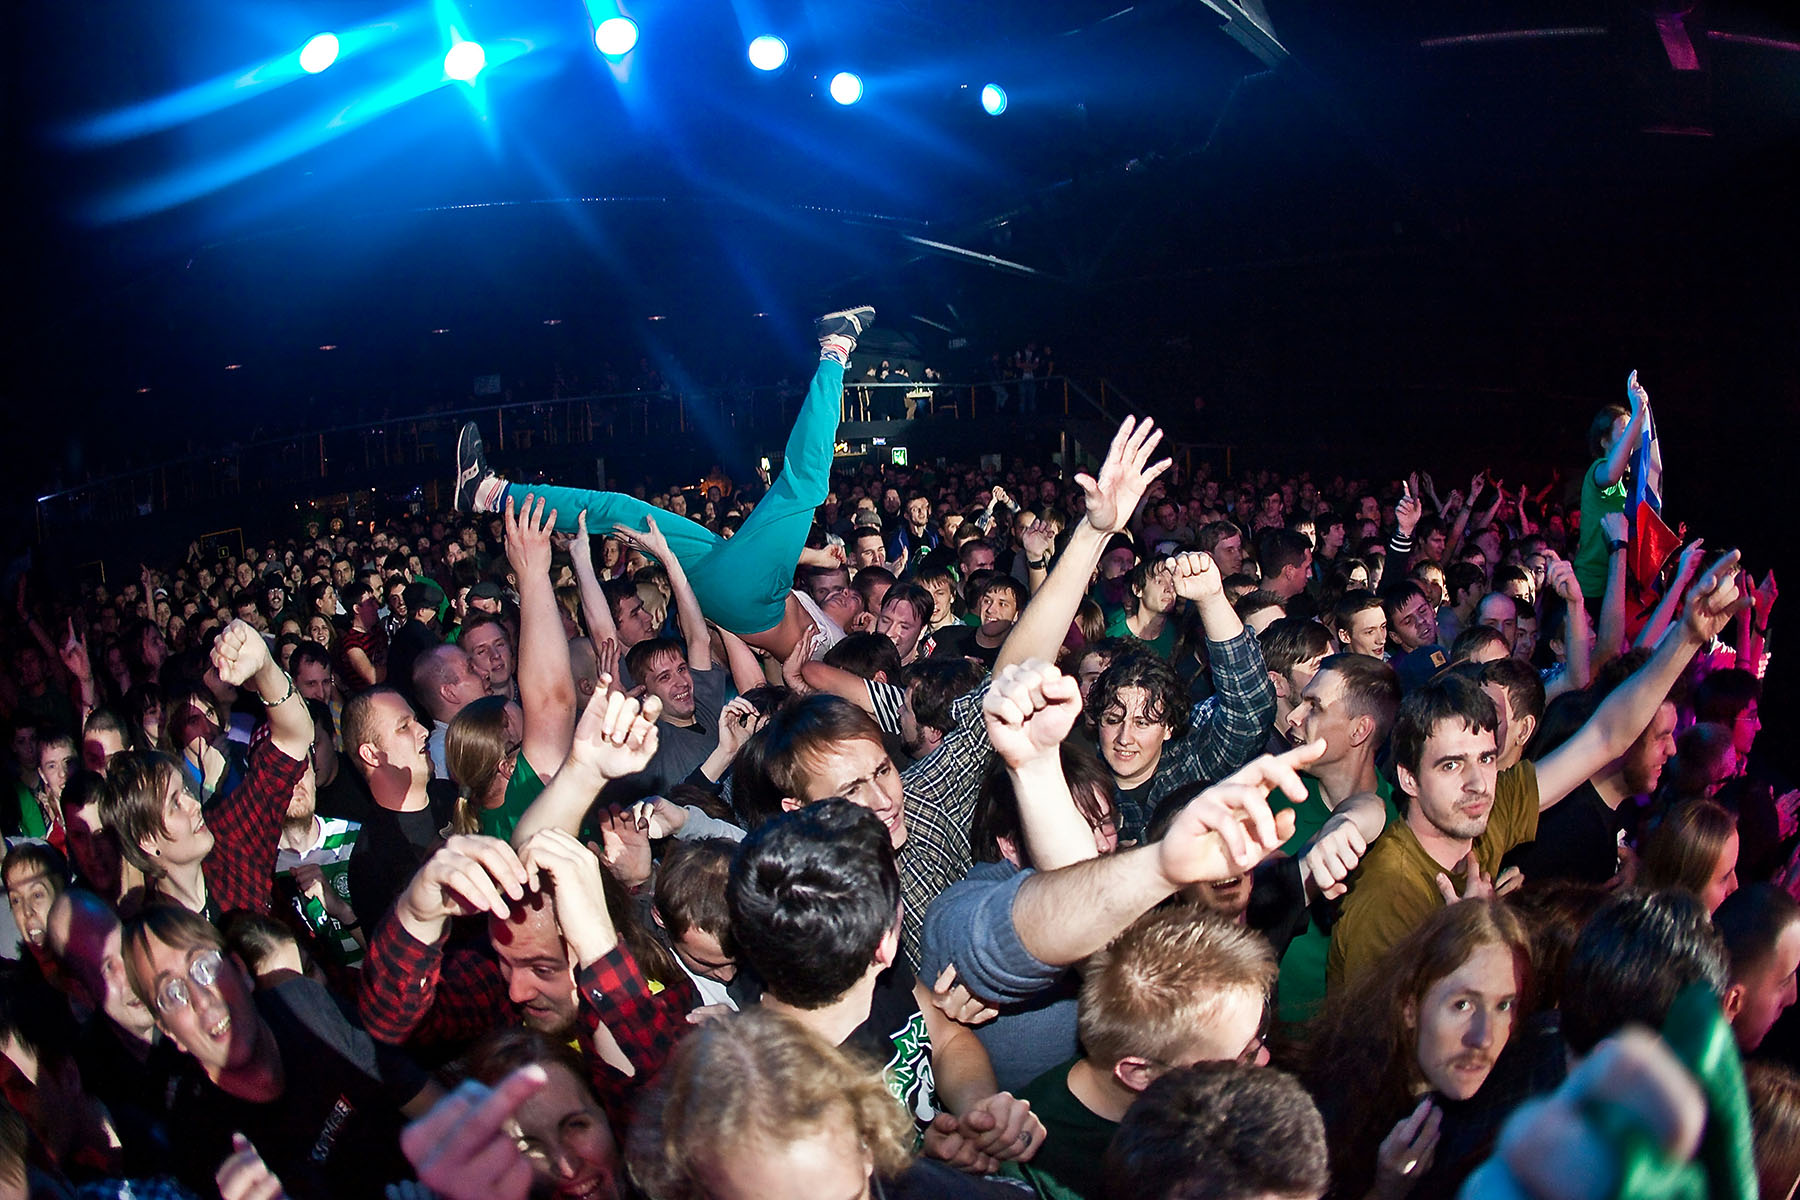 Artist does a stage dive into a large crowd of concert goers.